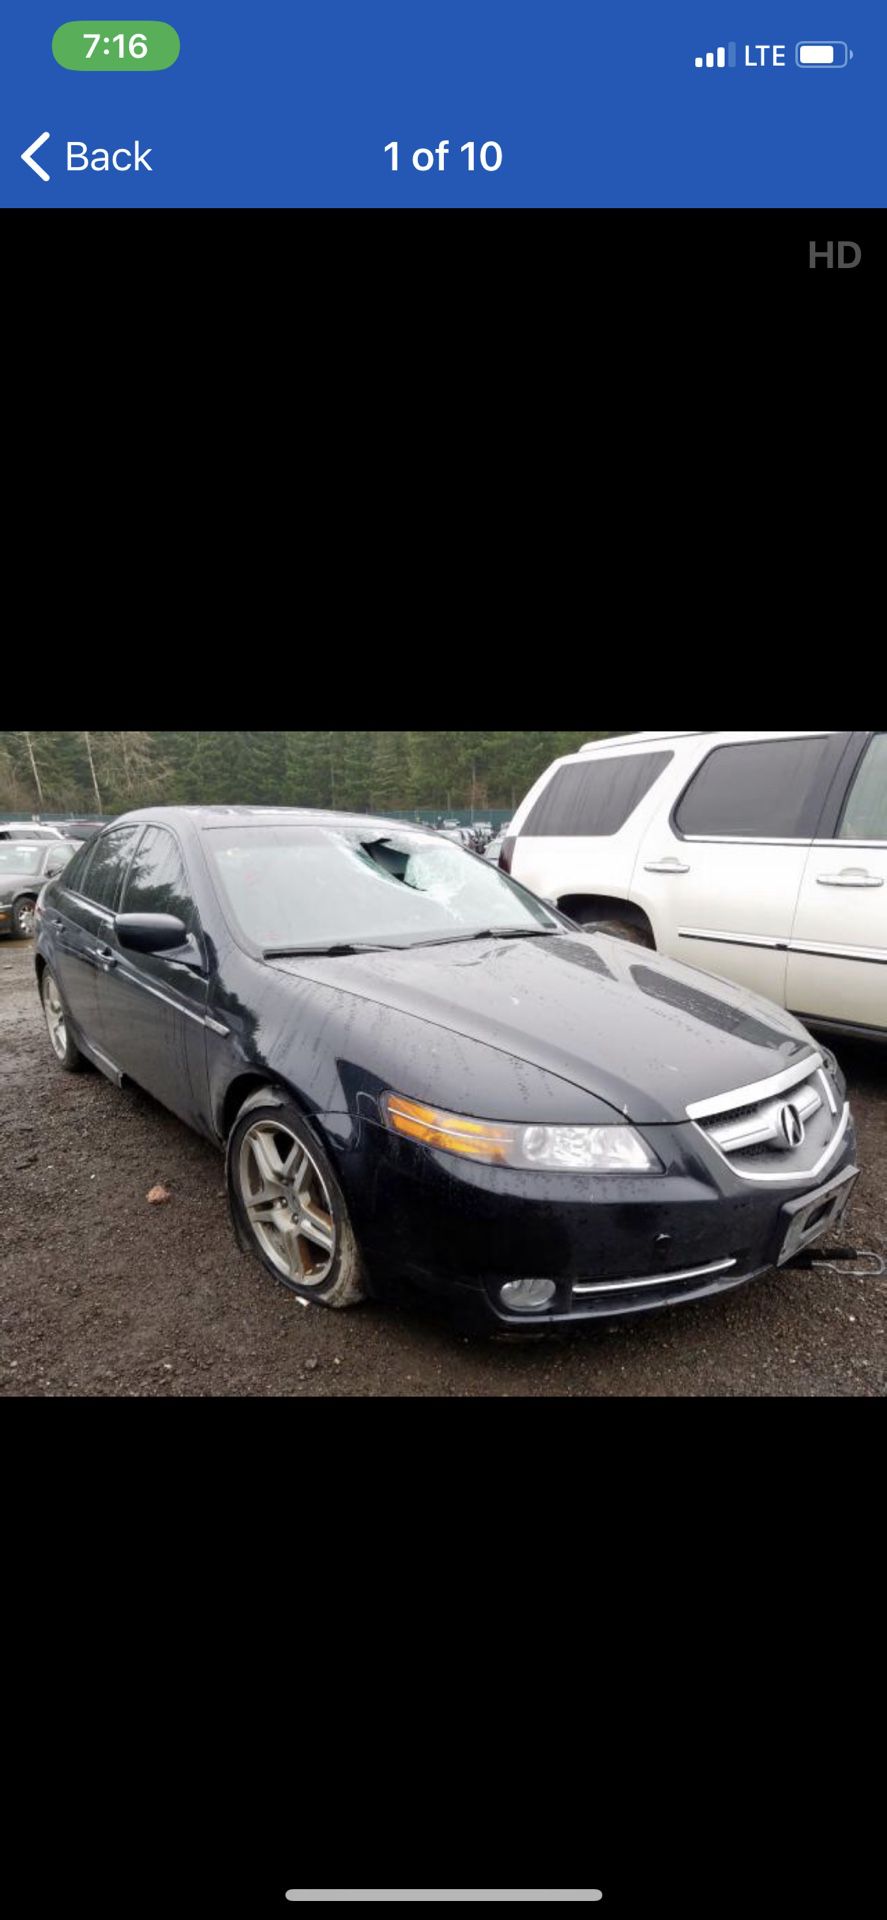 04-08 Acura TL parts shipping available